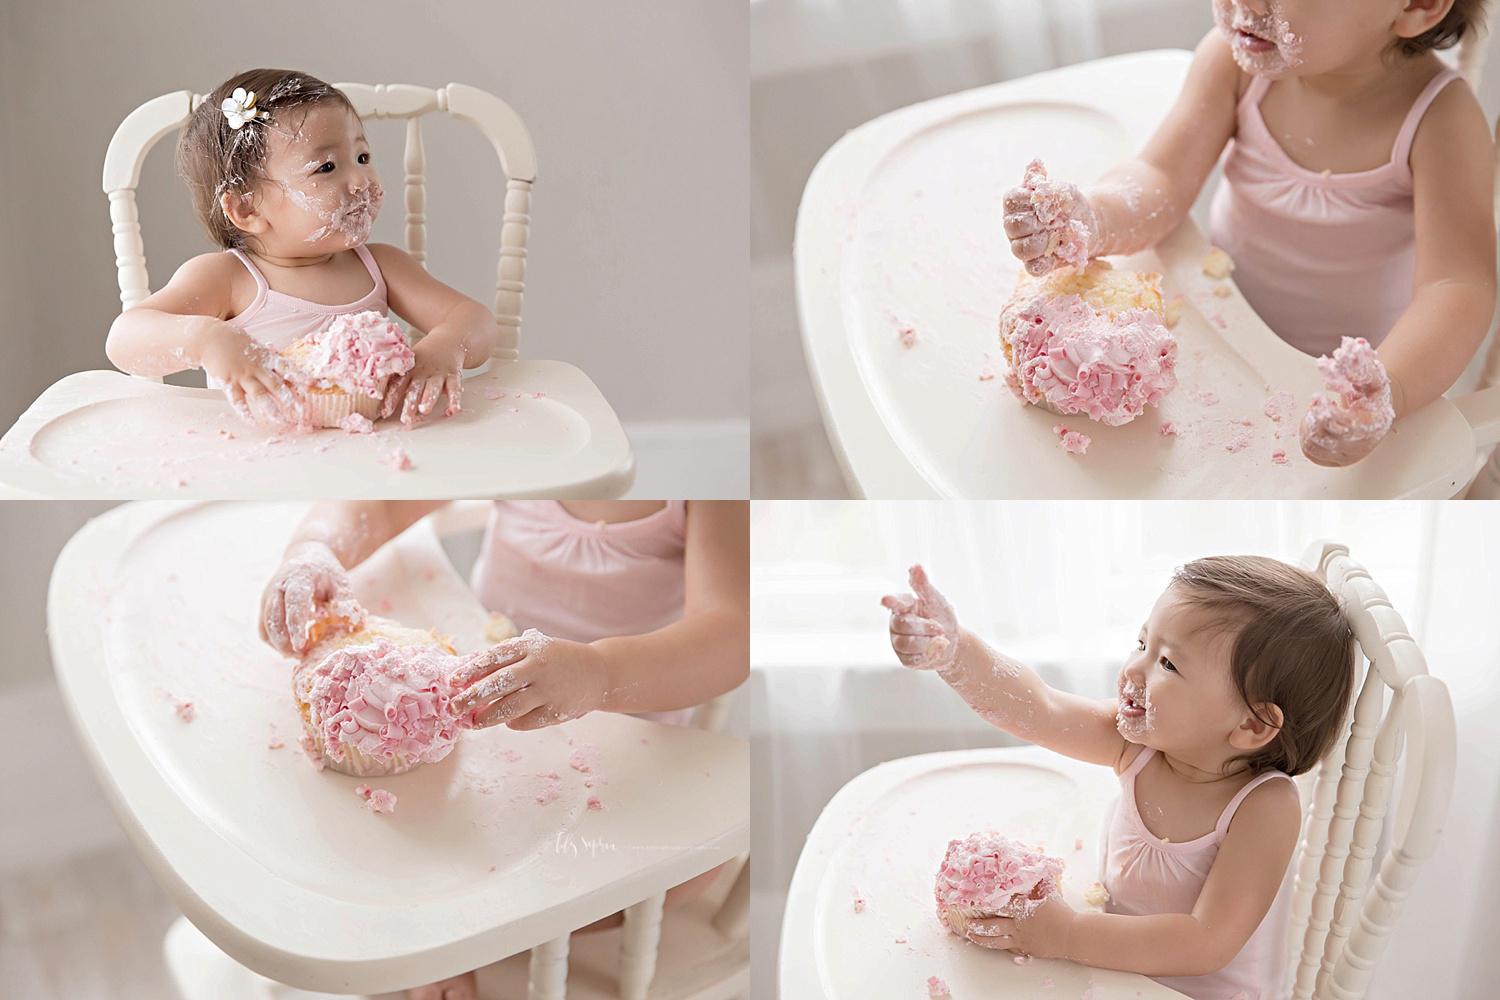  Photo collage of an Asian, baby, girl, covered with icing from her first birthday smash cake.&nbsp; 